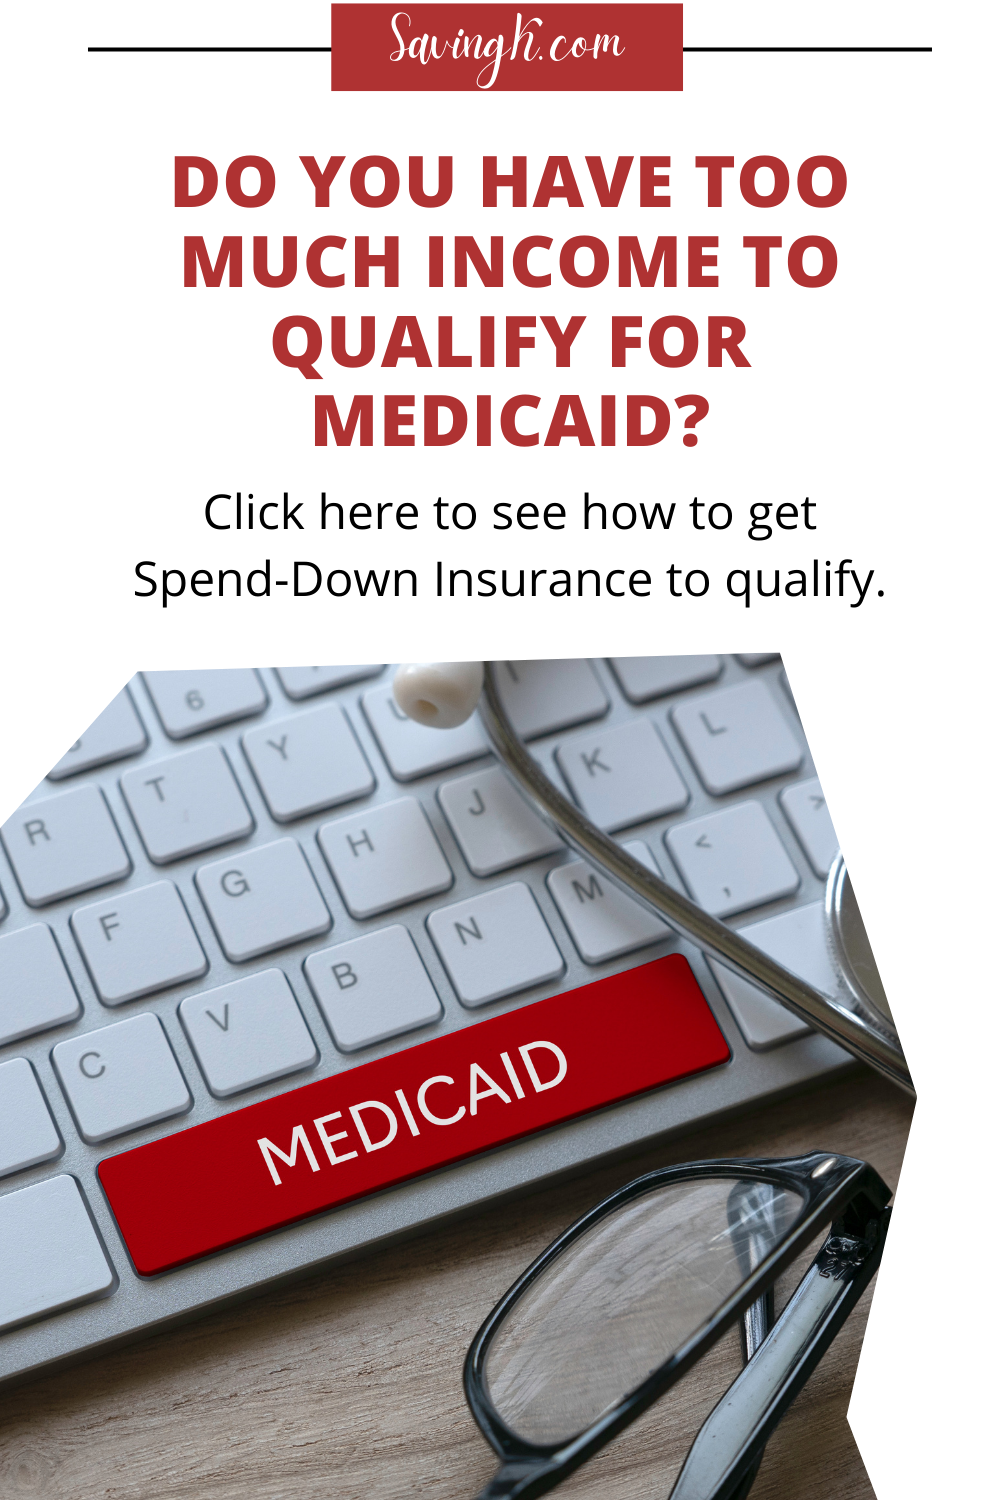 How To Get Spend-Down Insurance To Qualify For Medicaid